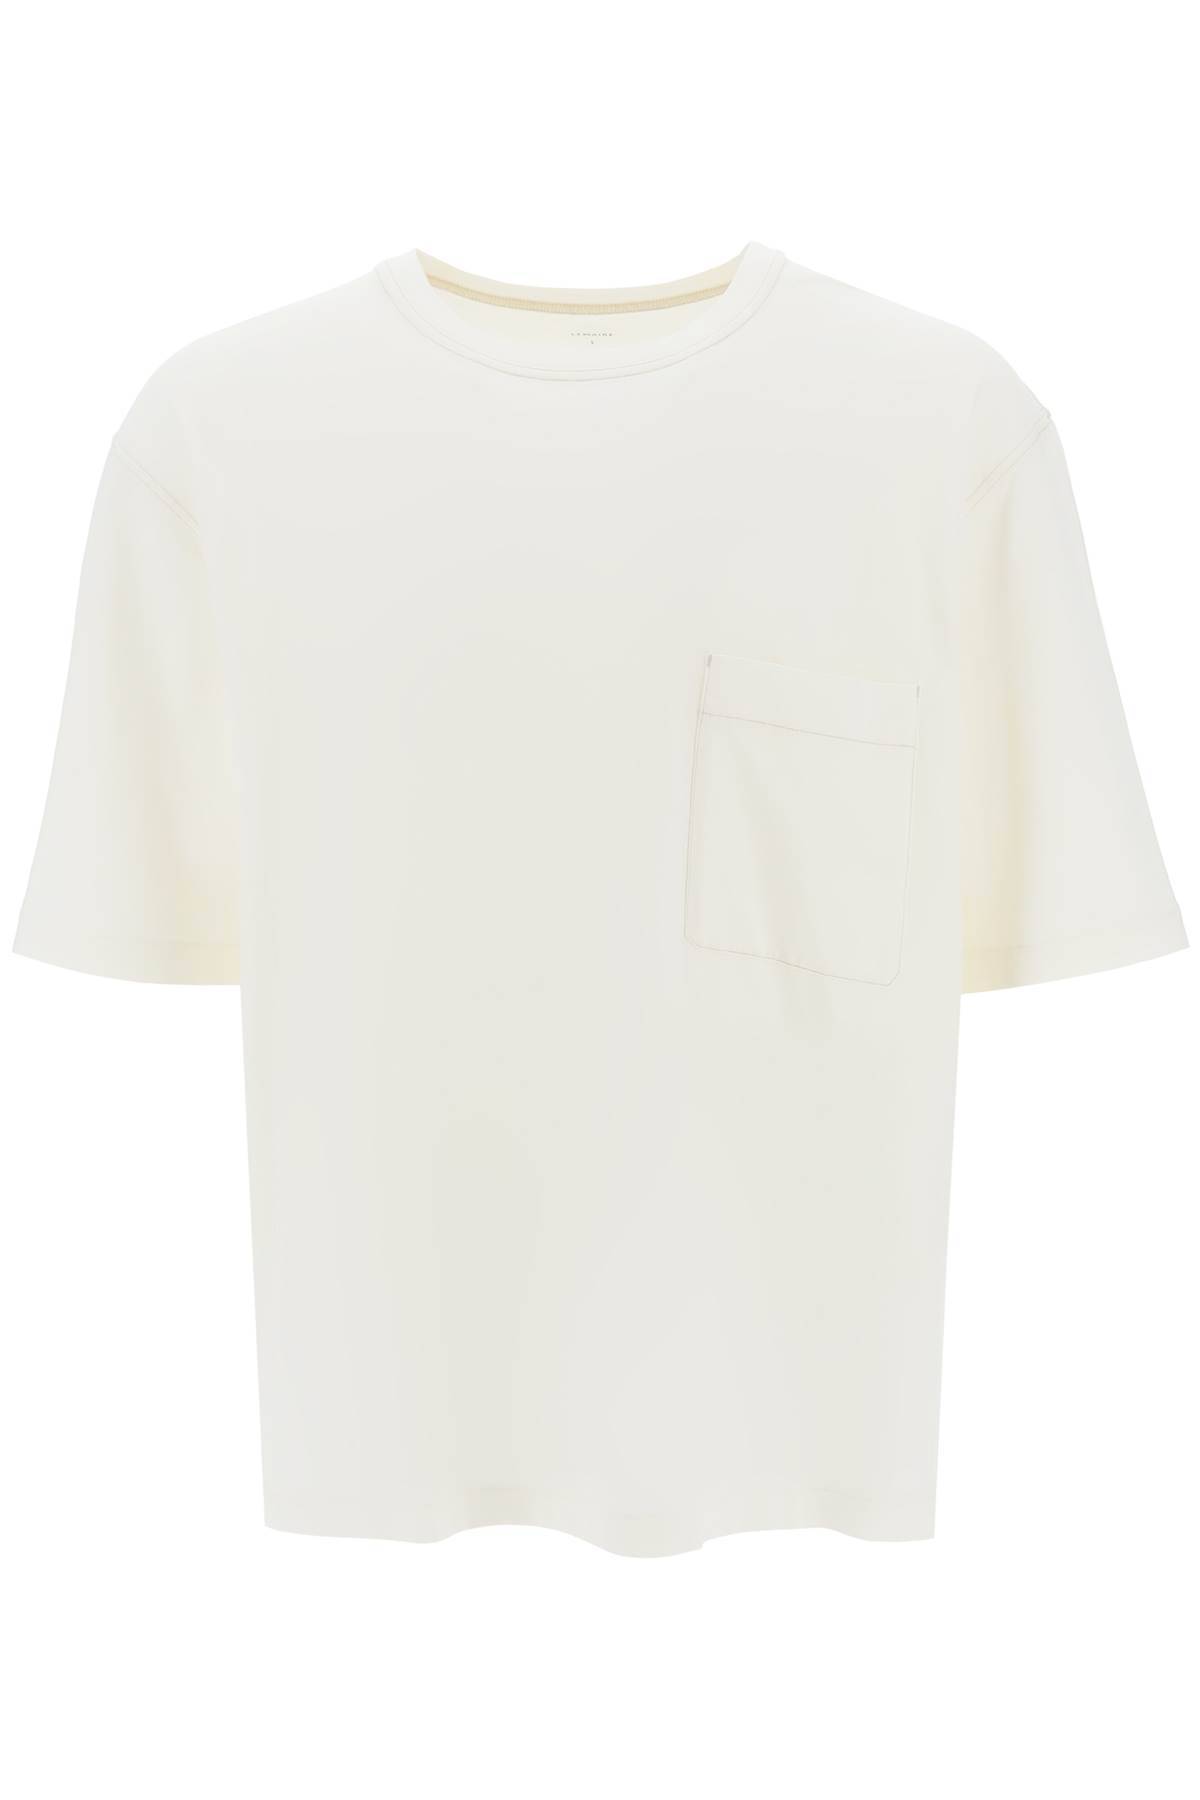 Lemaire LEMAIRE oversized t-shirt with patch pocket